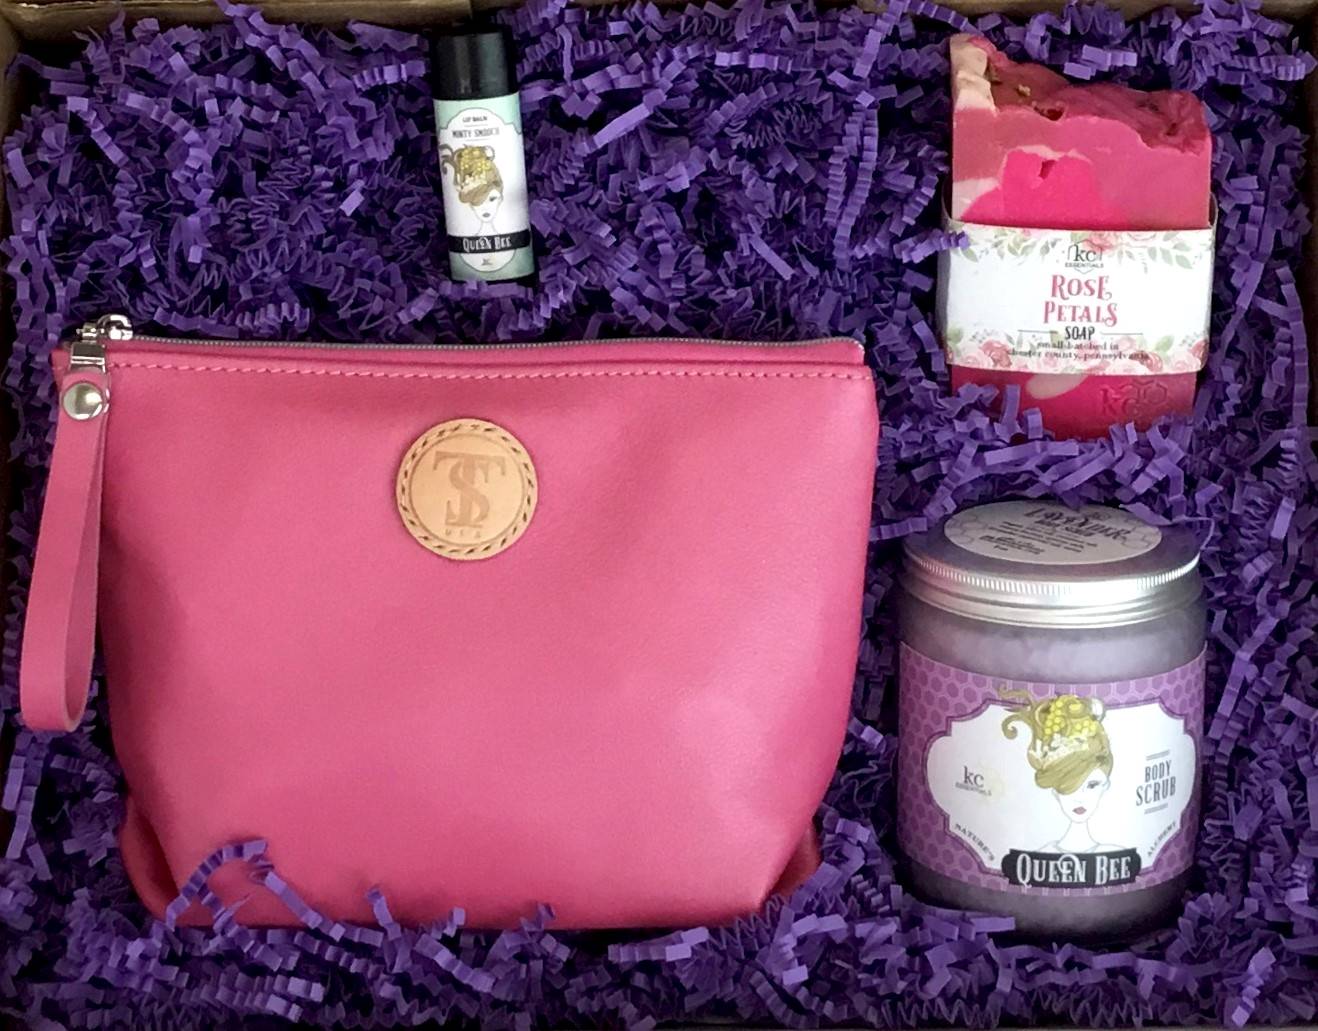 Town &amp; Shore Handcrafted Serenity Gift set featuring T5 Leather bath kit and brush bag shown in baby pink calfskin leather. KC Essentials artisan made vegan bar soap, essential oils body scrub and soothing lip balm. Arranged in gift box with sustainable eco-friendly purple crinkle paper.